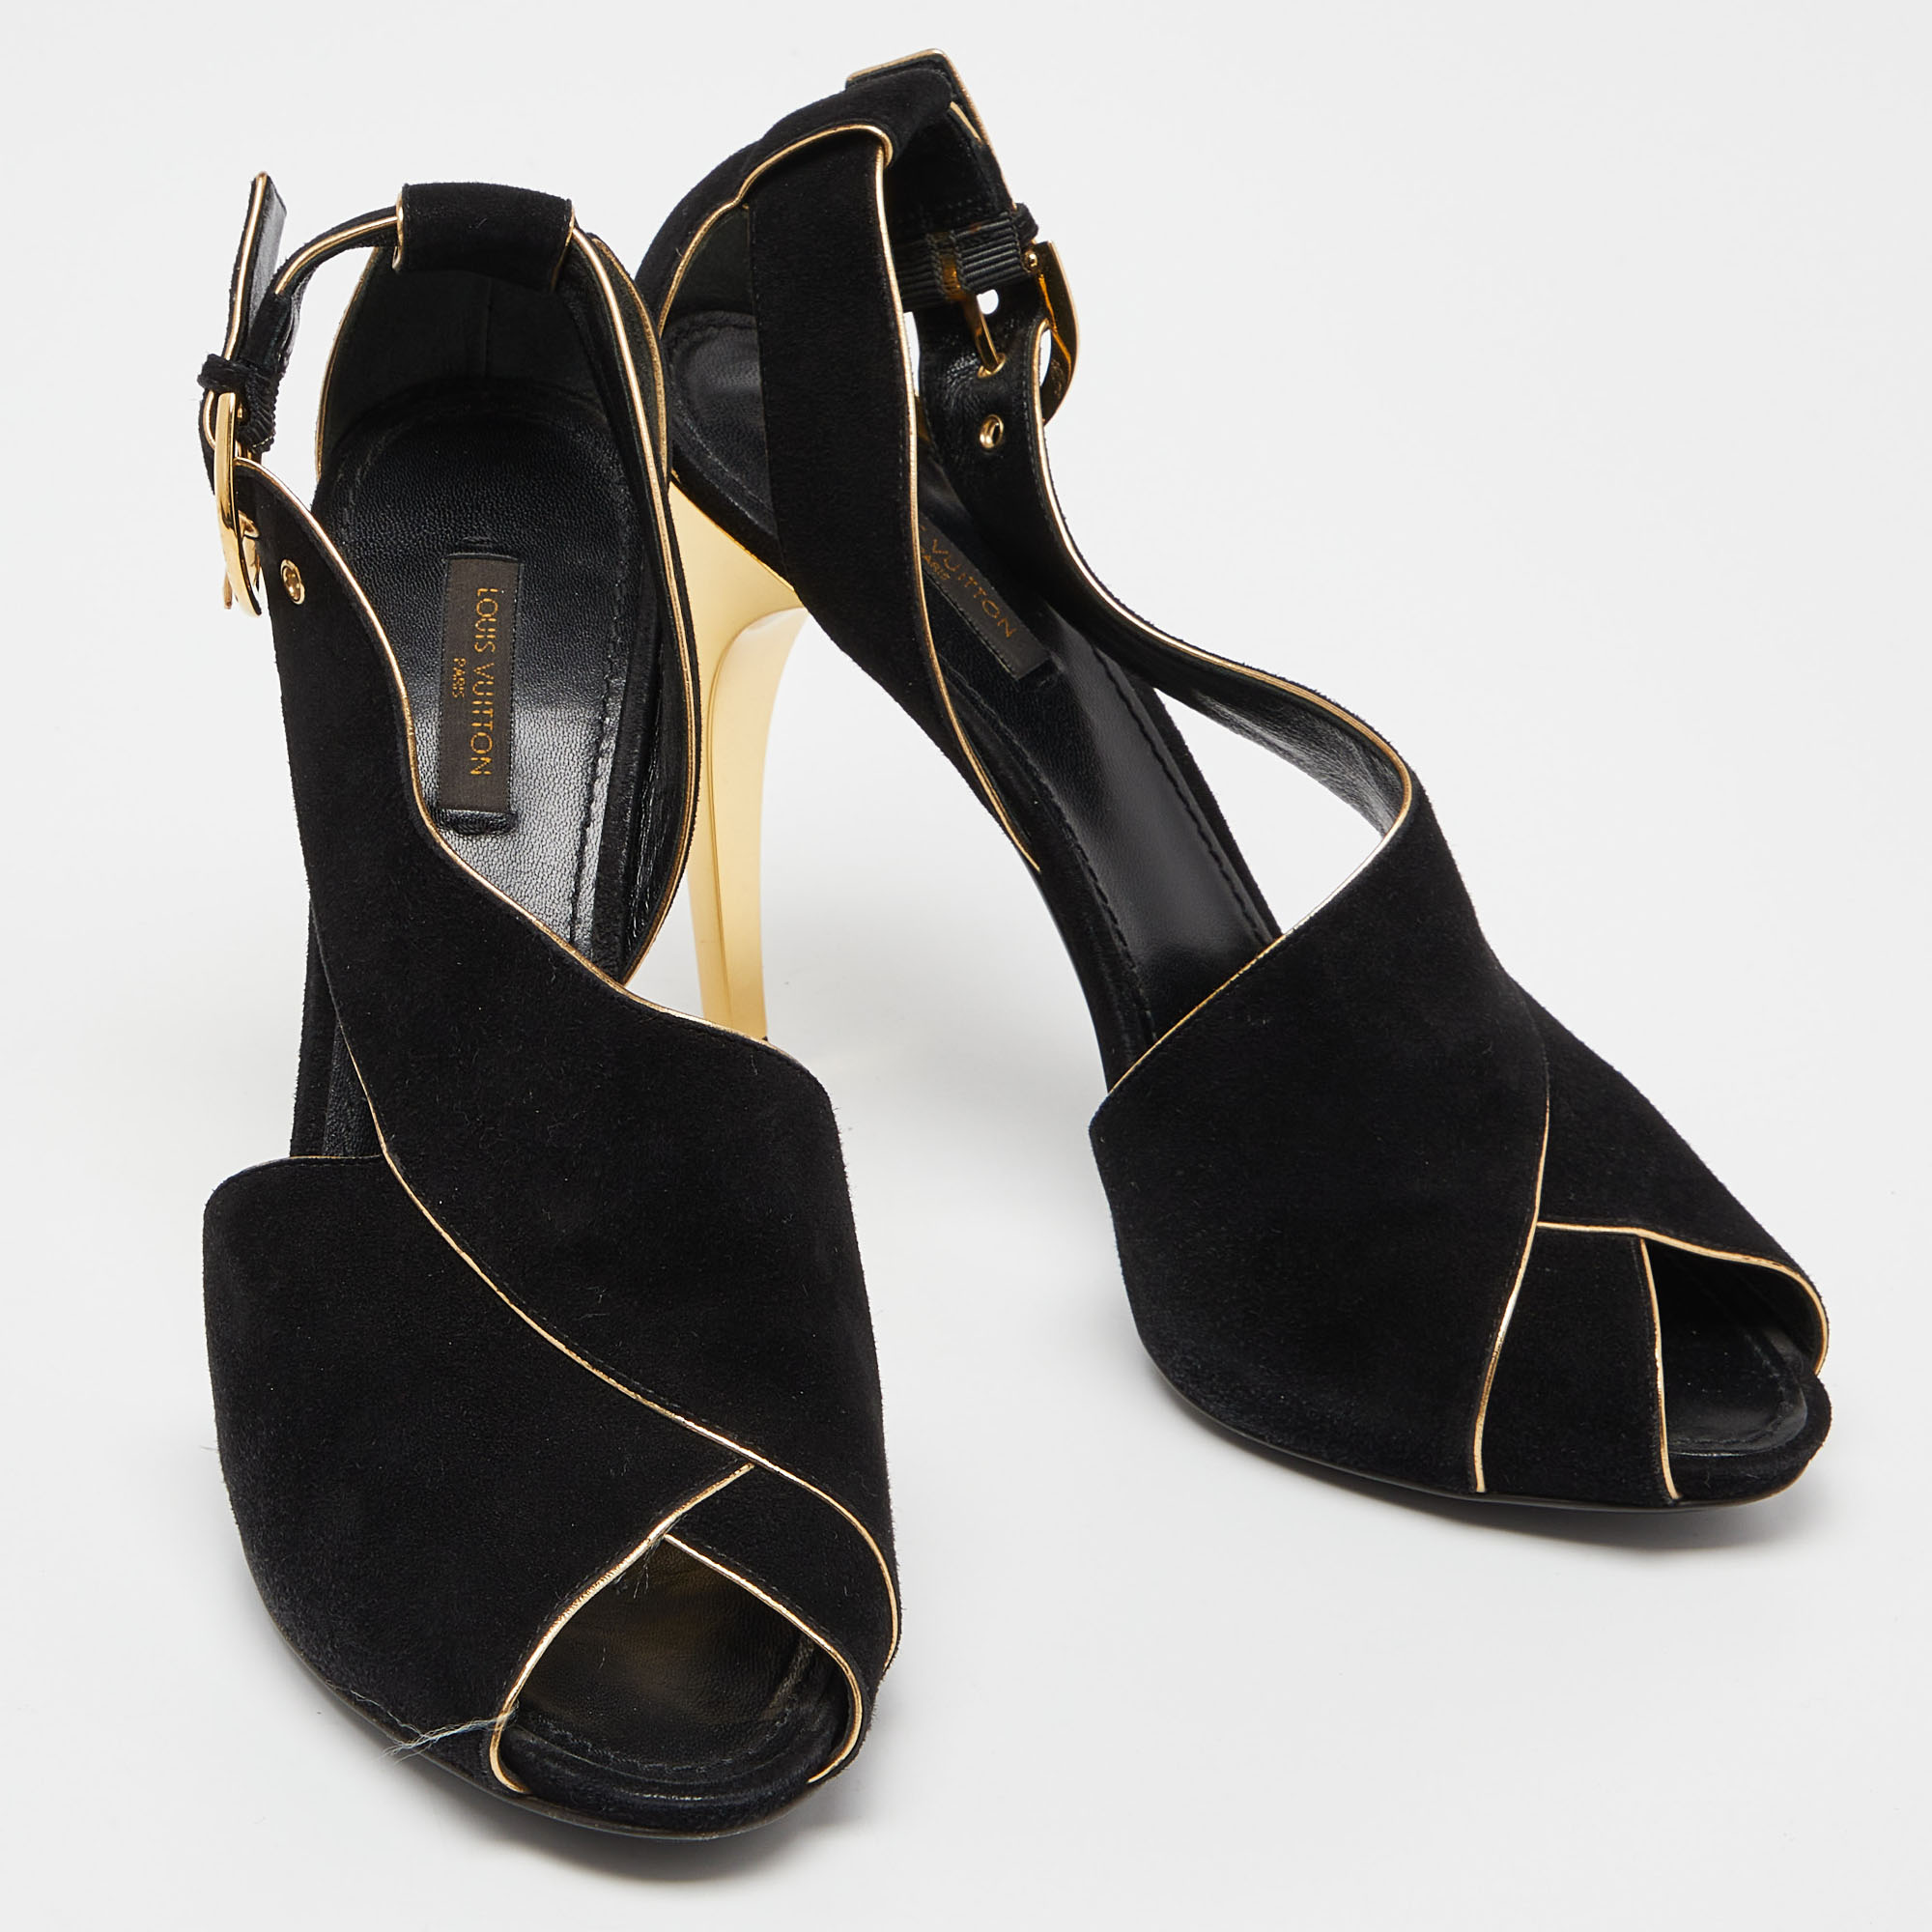 Louis Vuitton Black Leather And Suede Slingback Sandals Size 41